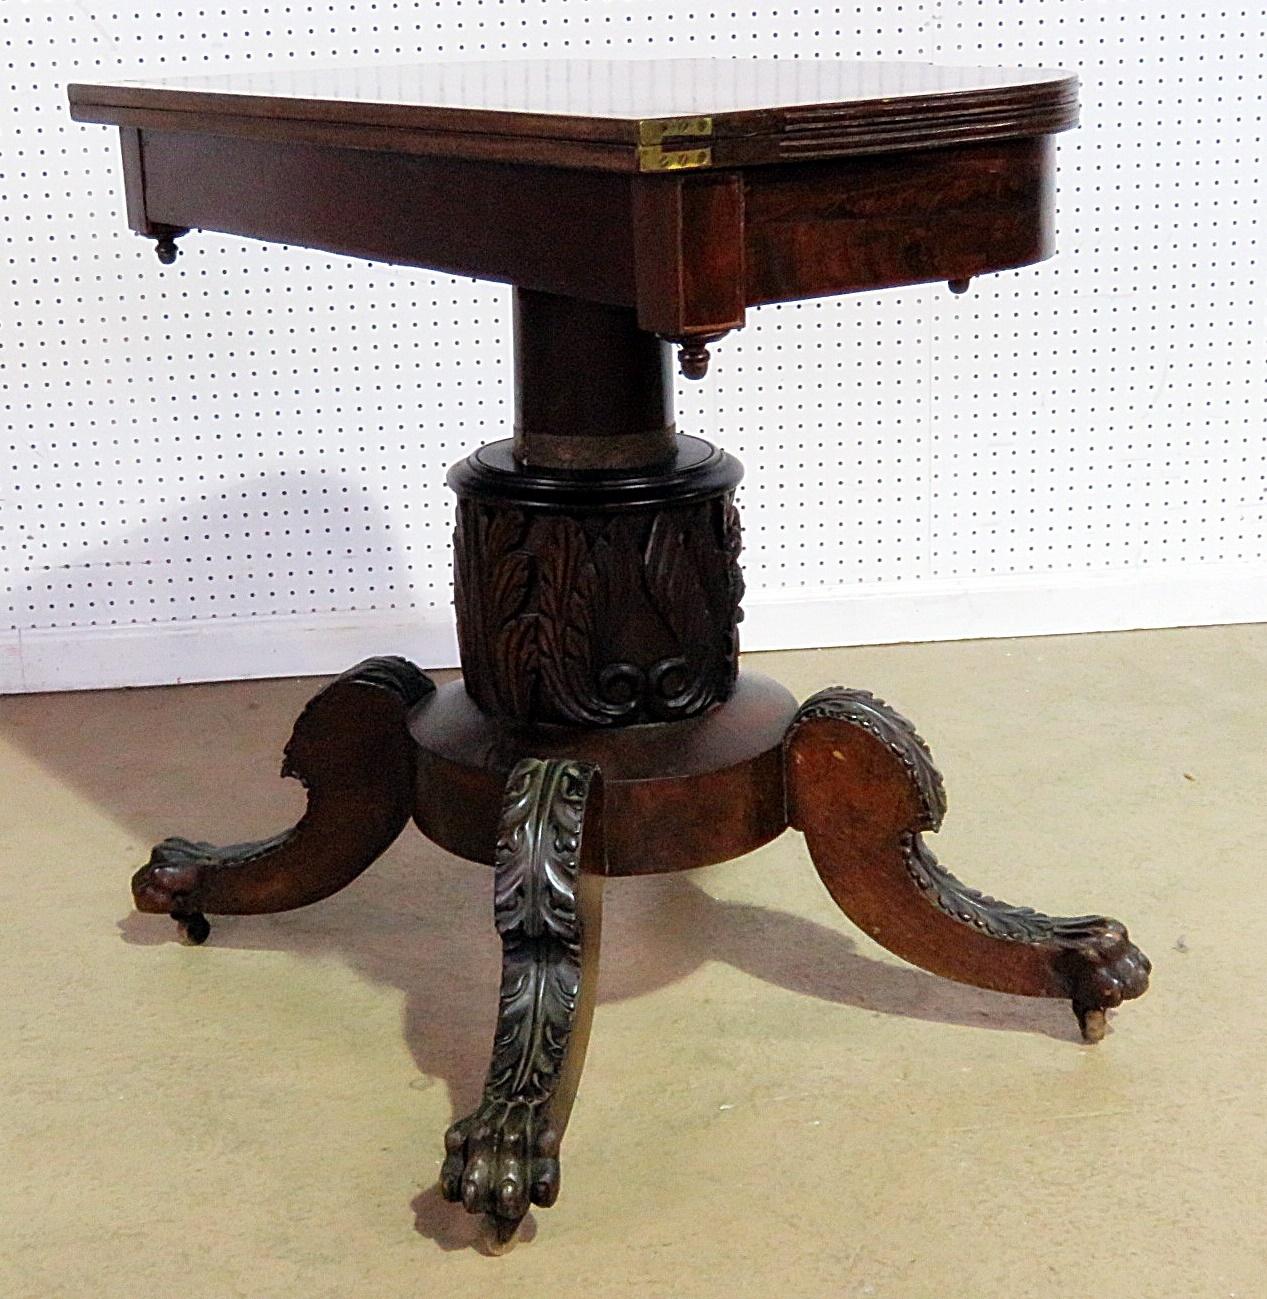 Antique Duncan Phyfe style flip top card table with claw feet on casters.